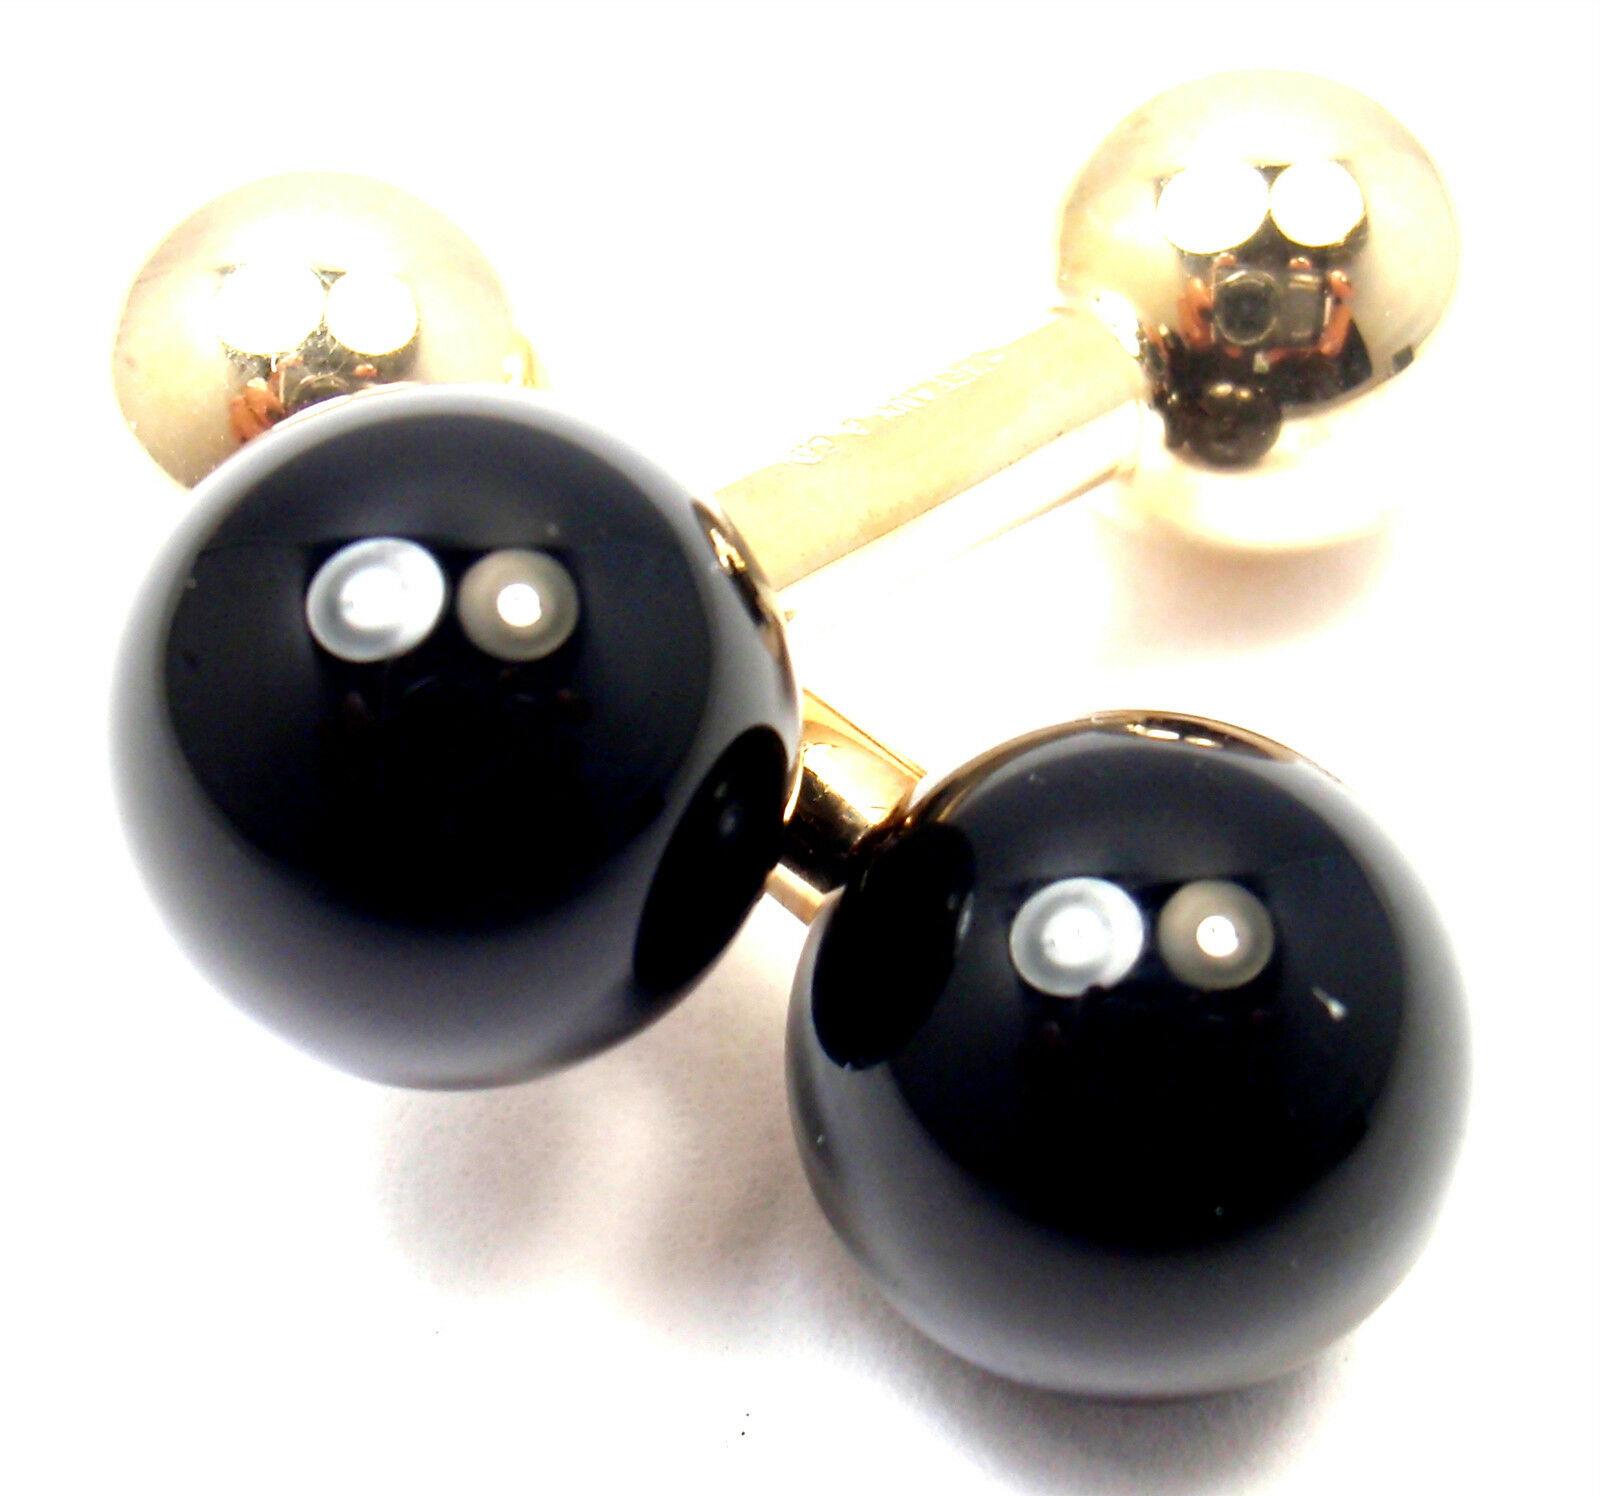 14k Yellow Gold Black Onyx  Dumbbell Cufflinks by Tiffany Co. 
With 2 round black onyx stones 11mm each
Details: 
Measurements: 11mm x 10mm x 30mm
Weight: 7.5 grams
Stamped Hallmarks:  Tiffany & Co. 585
*Free Shipping within the United States*
YOUR